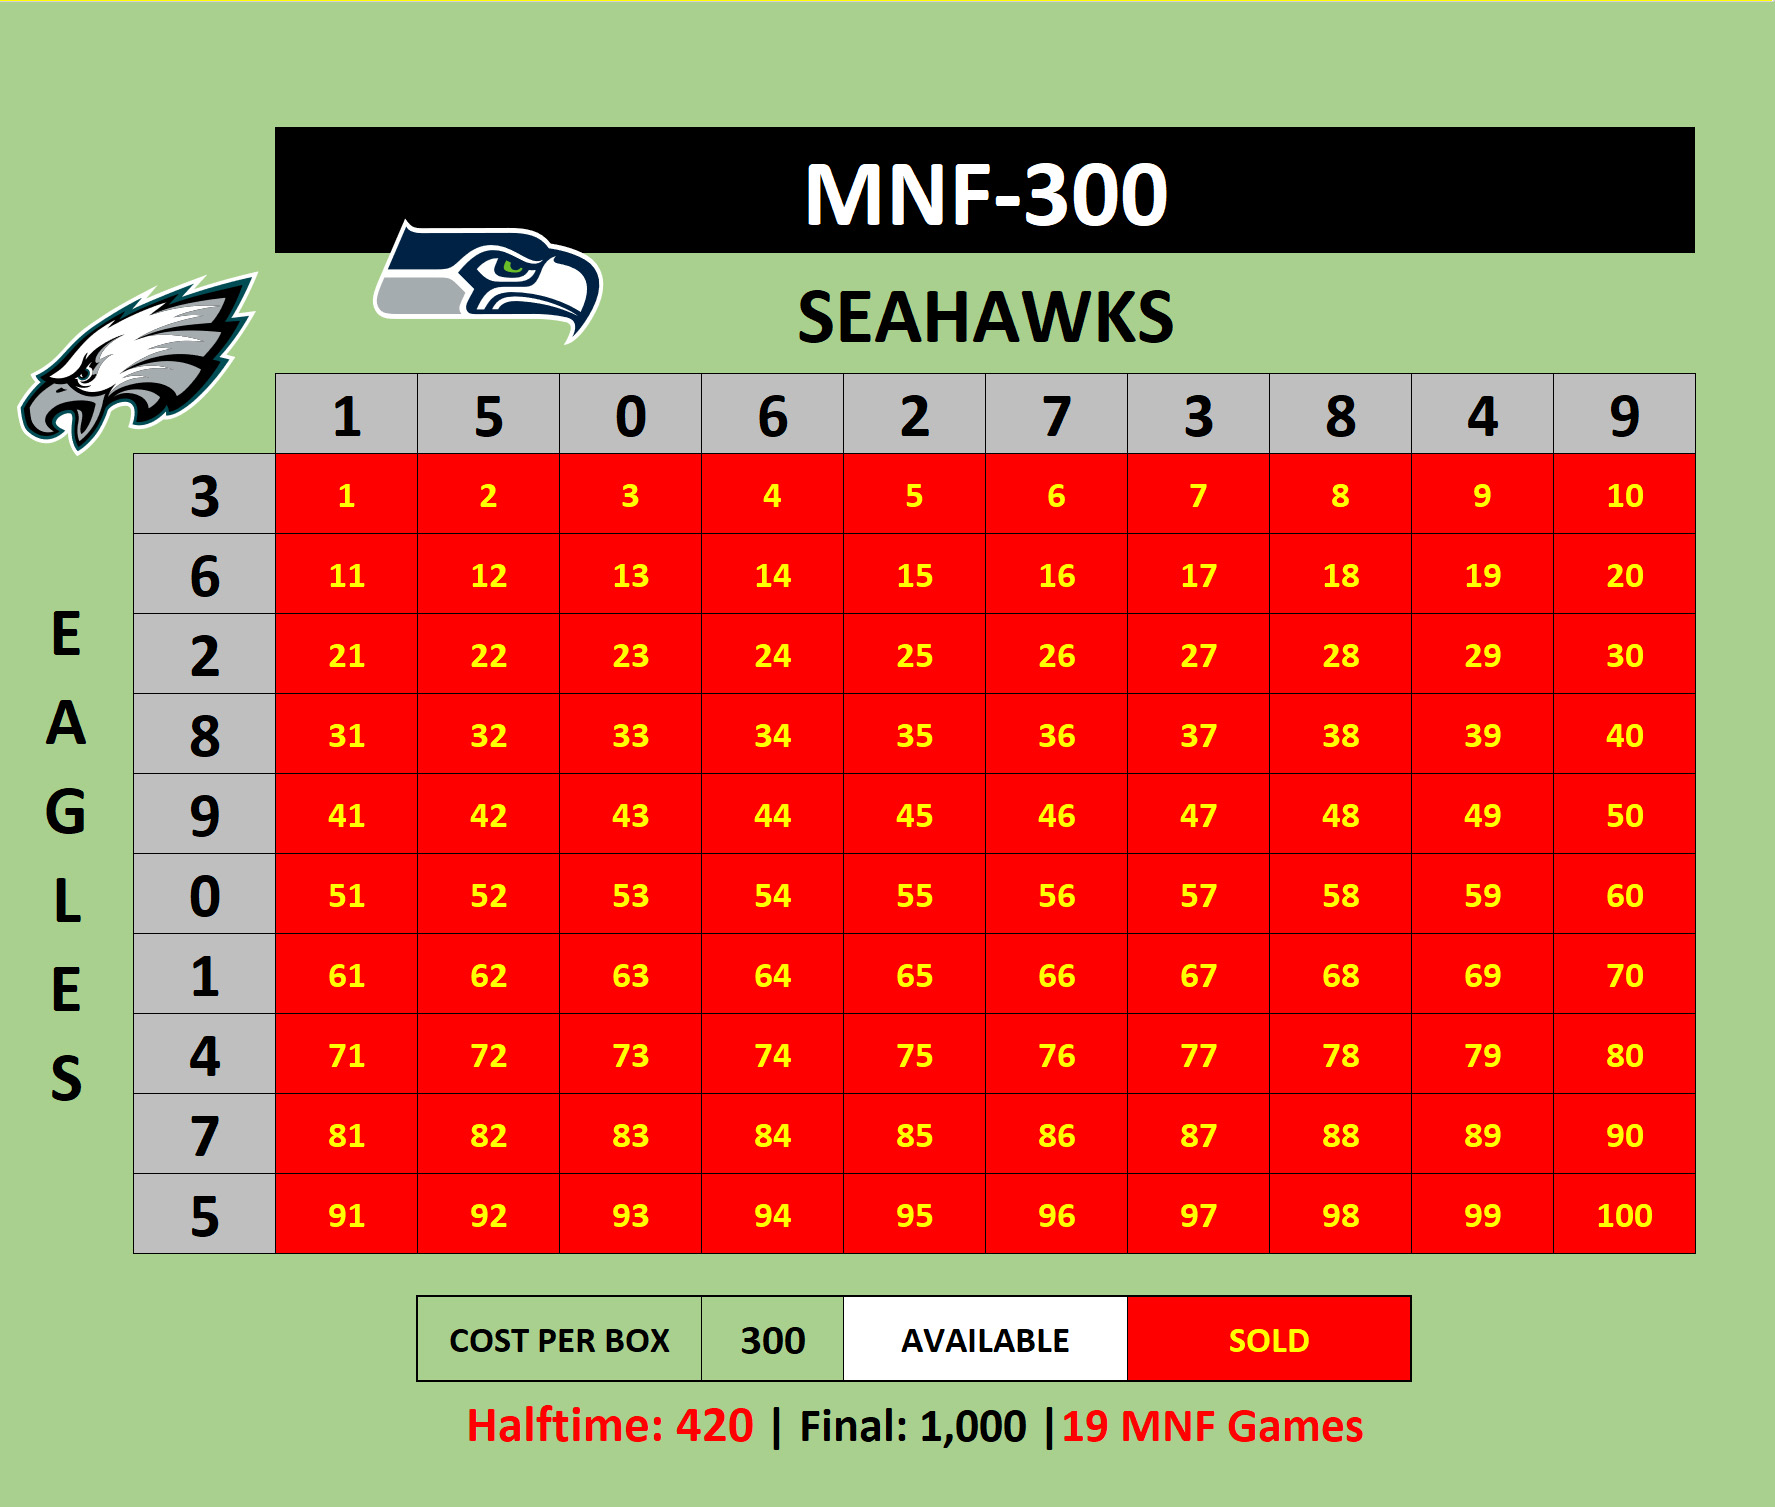 MNF-300 Eagles at Seahawks